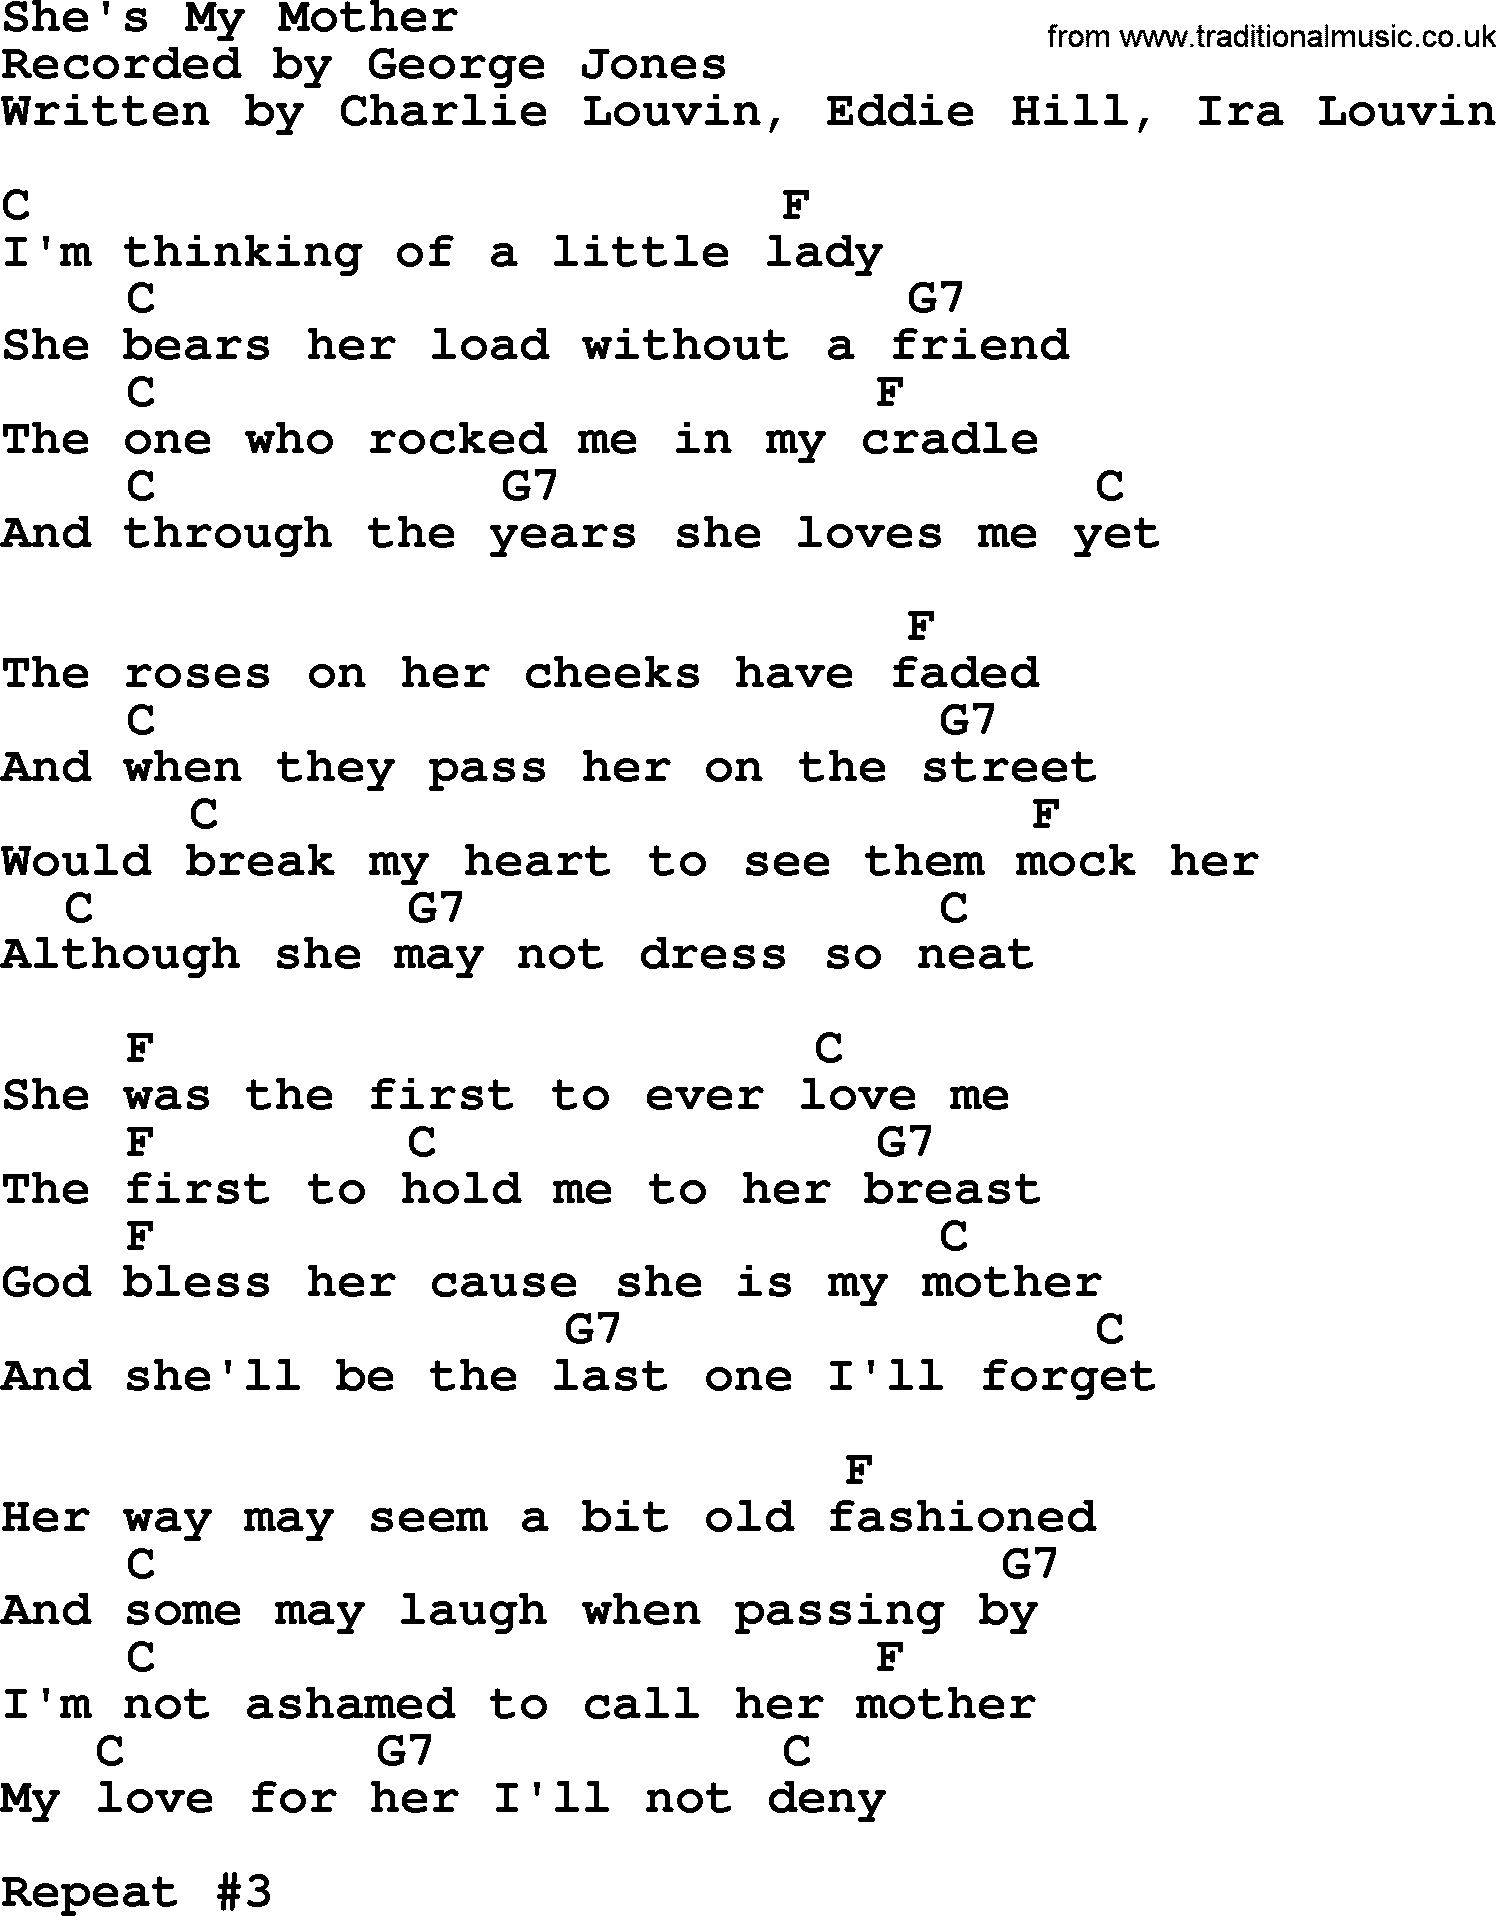 George Jones song: She's My Mother, lyrics and chords